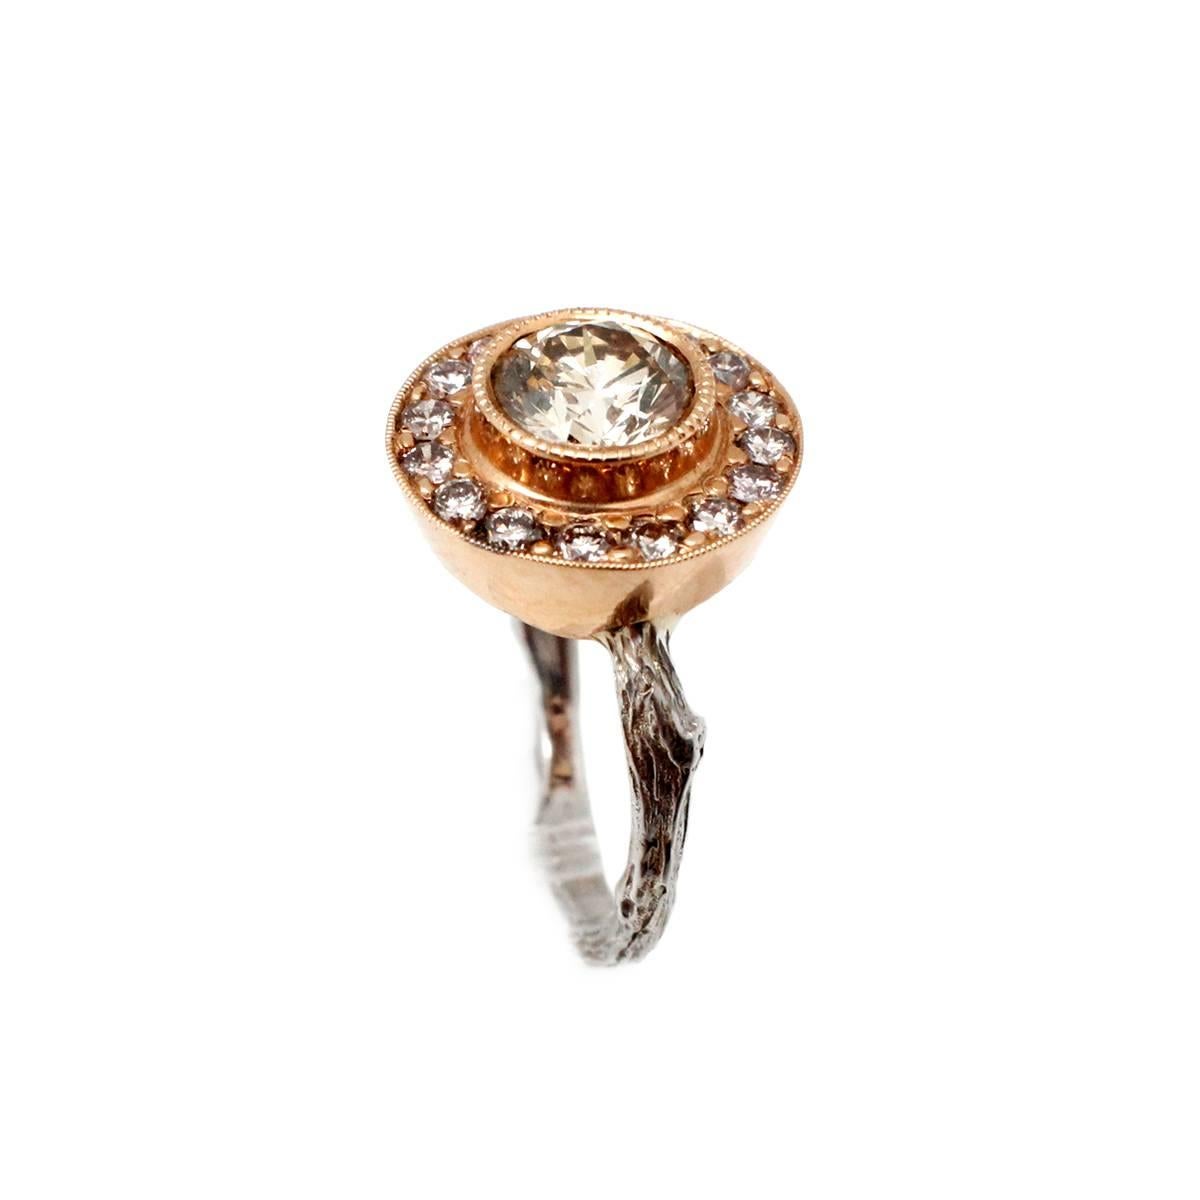 K. Brunini 18k White/Rose Gold Diamond Halo Twig Ring Size 6
This gorgeous ring is made in 18k white and rose gold by K. Brunini for the Twig collection. The center diamond weighs approximately 1.10 carats, and it is graded champagne in color and